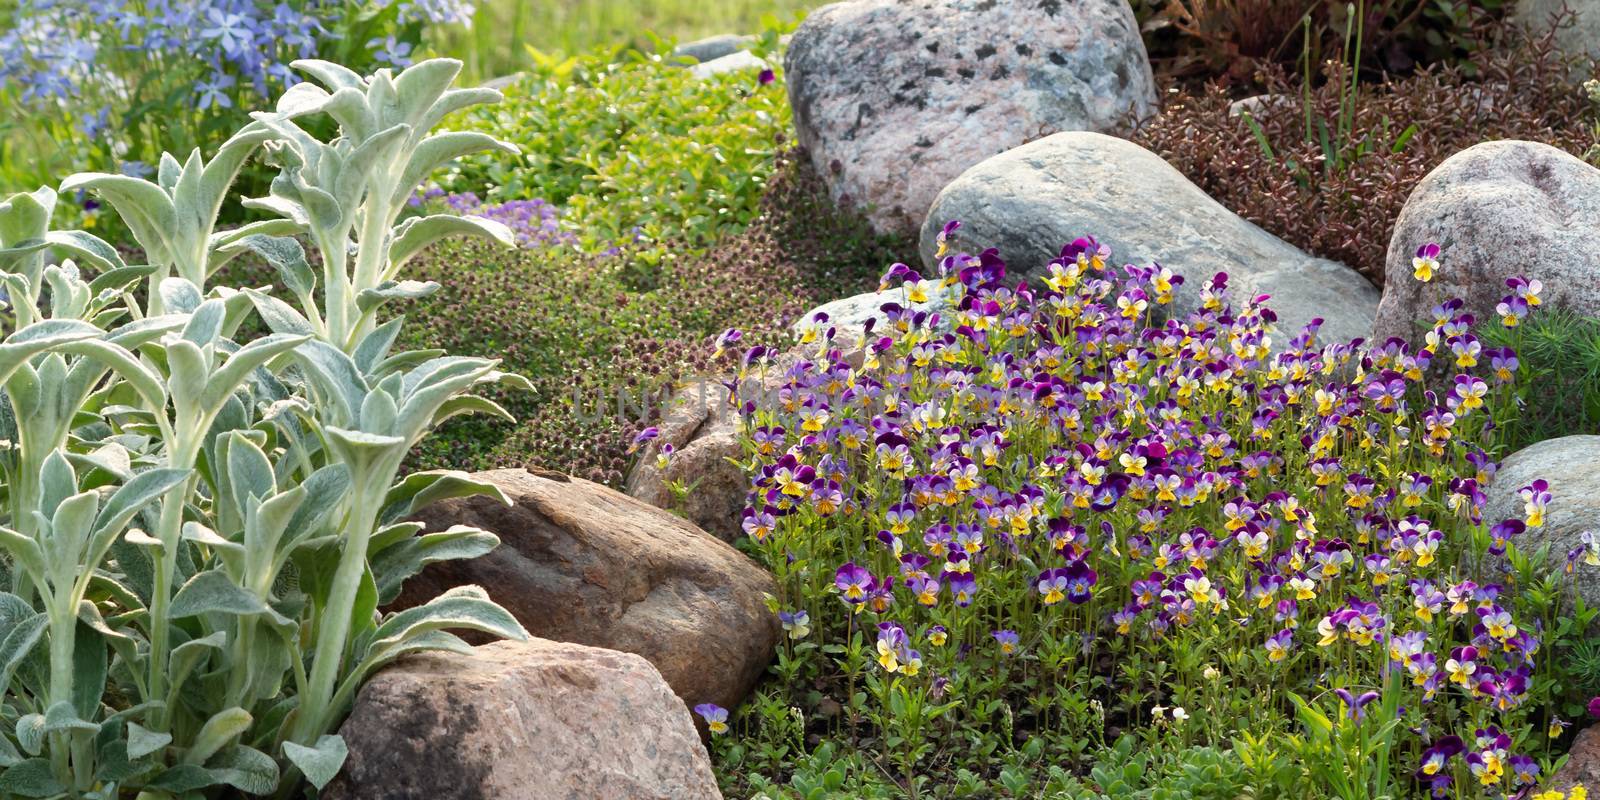 Blooming violets and other flowers in a small rockery in the summer garden by galsand